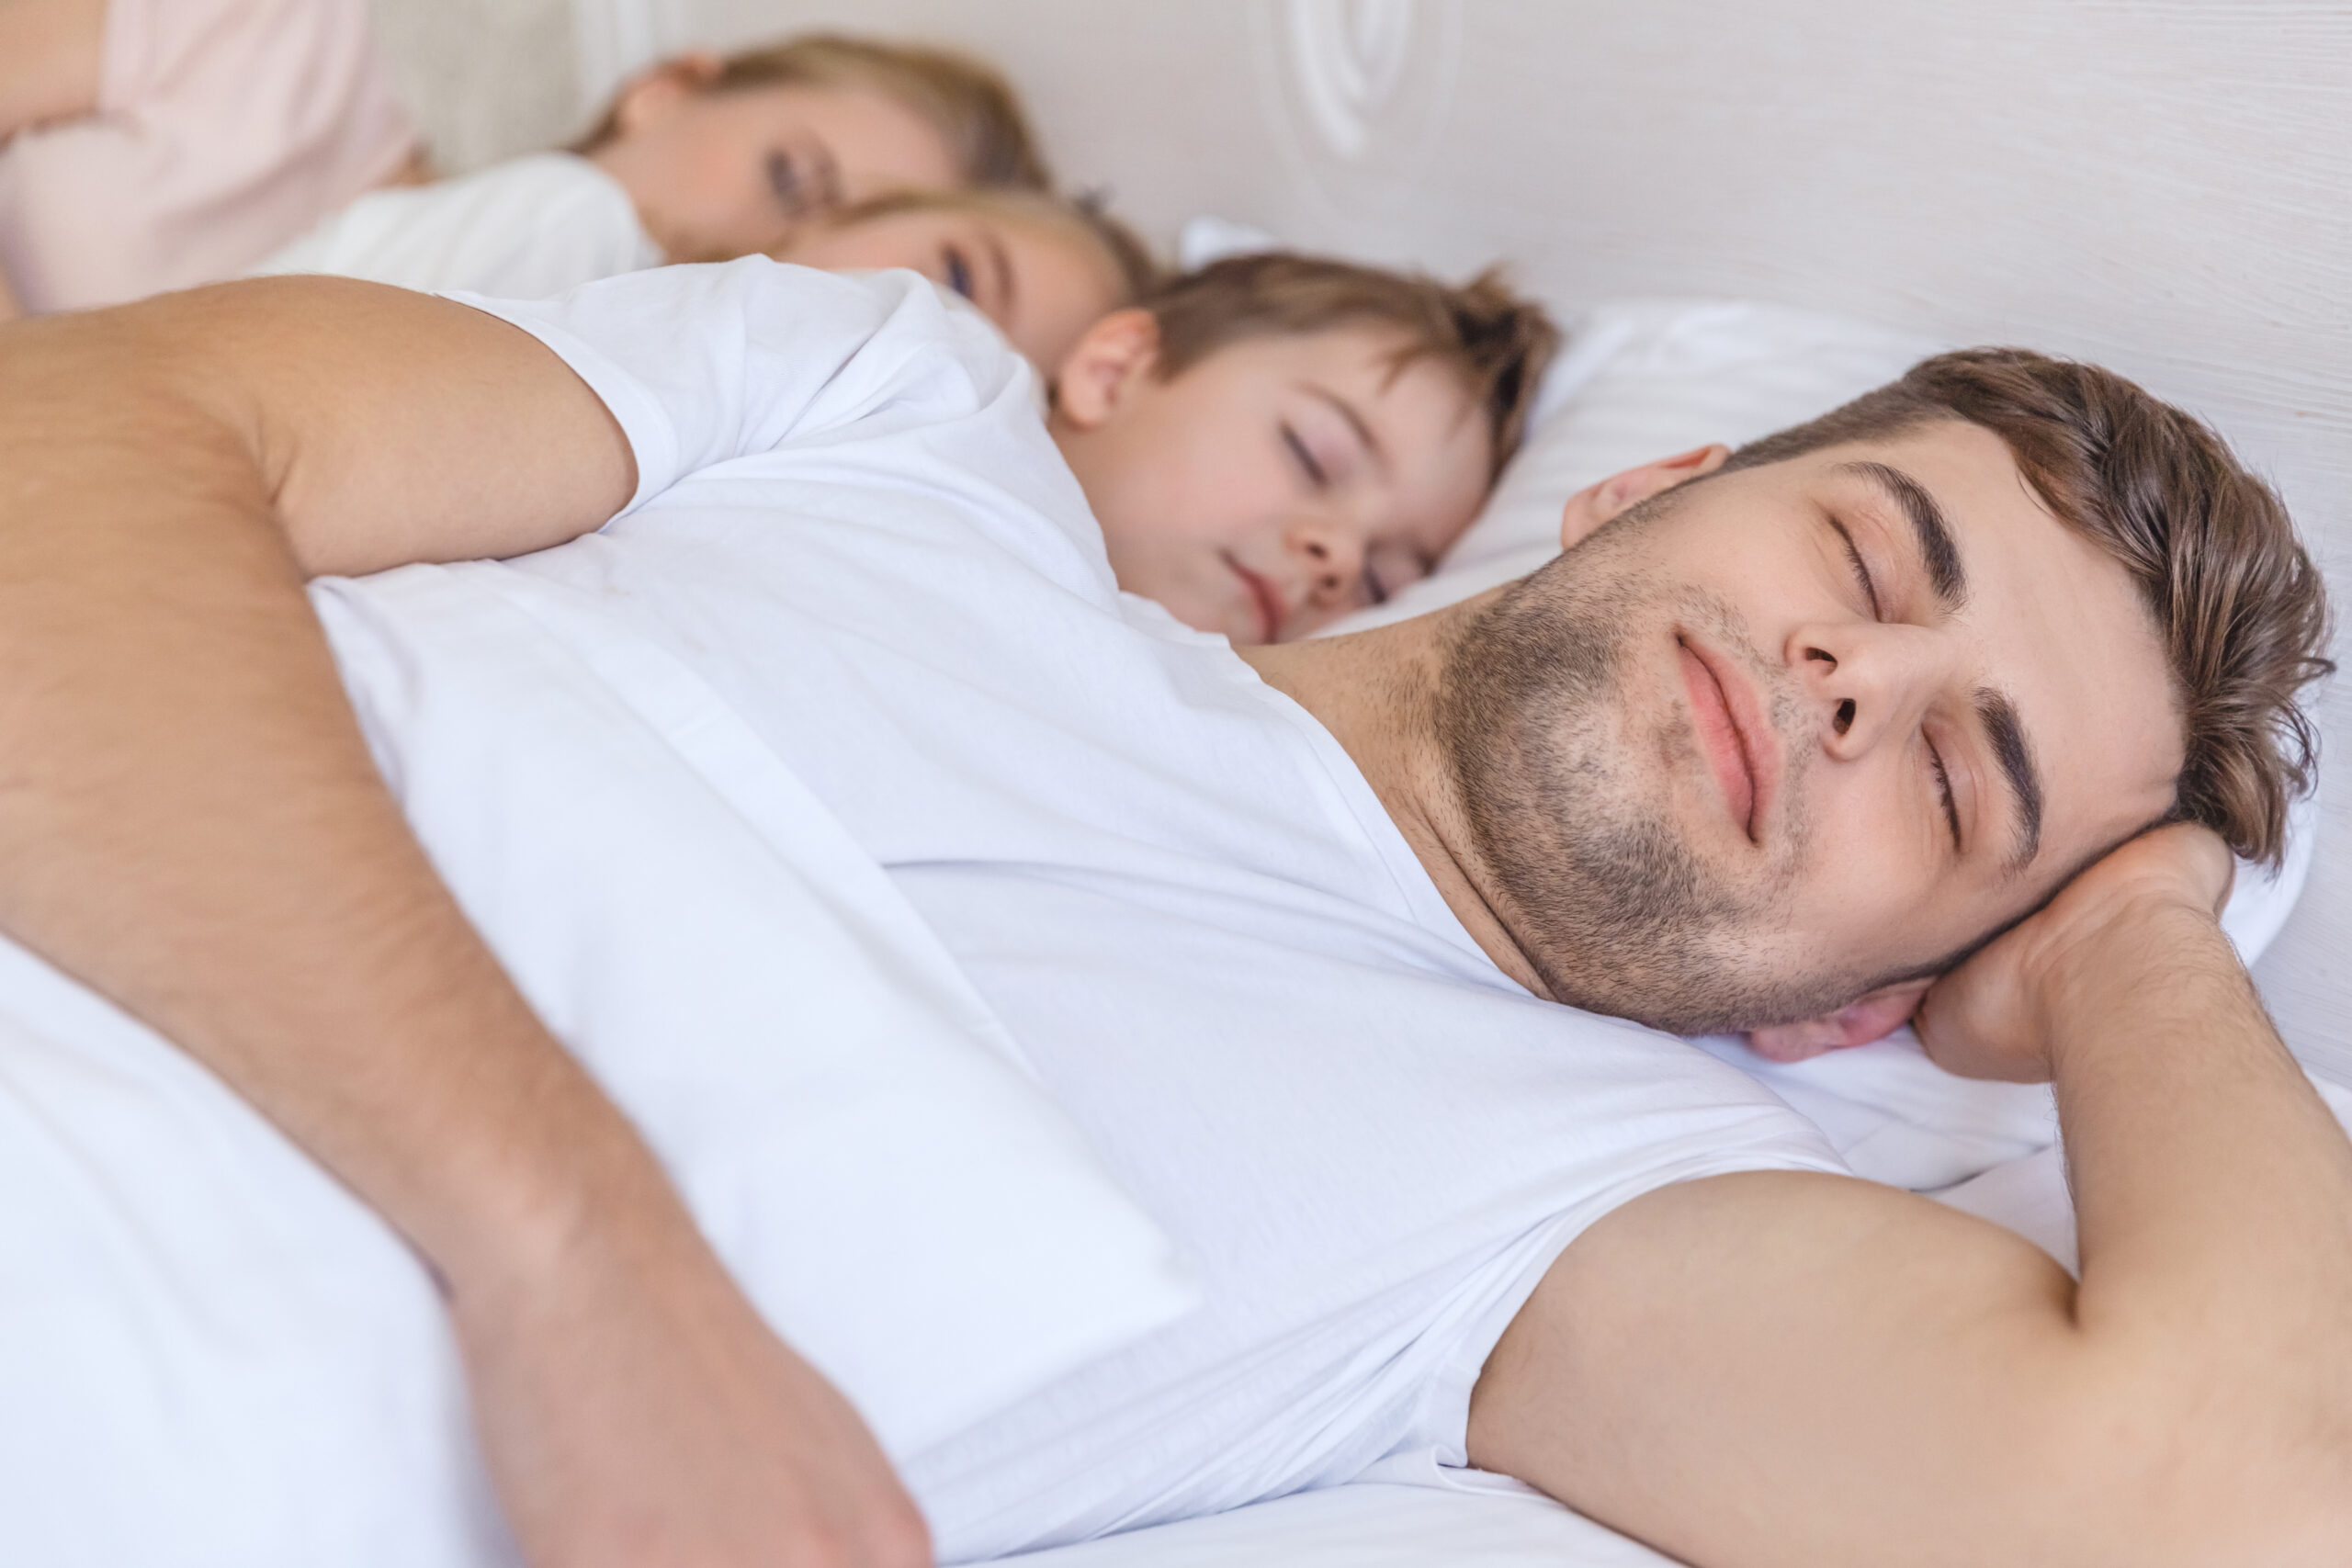 Co-sleeping: Your Opinion Matters